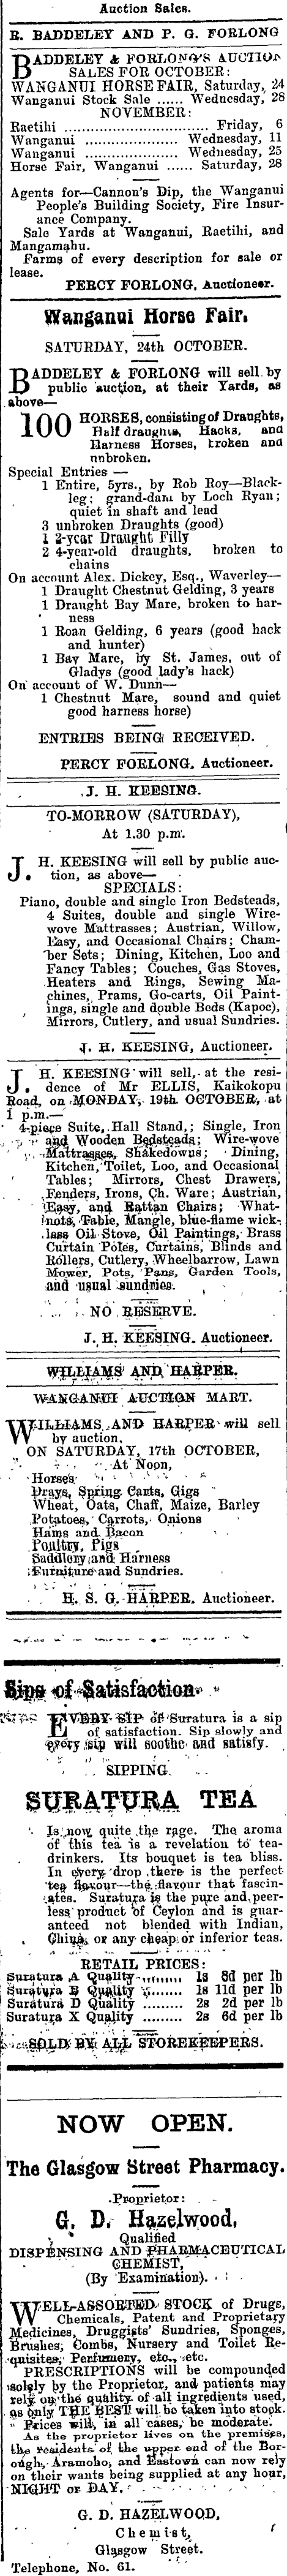 Papers Past Newspapers Wanganui Herald 16 October 1903 Page 8 Advertisements Column 2